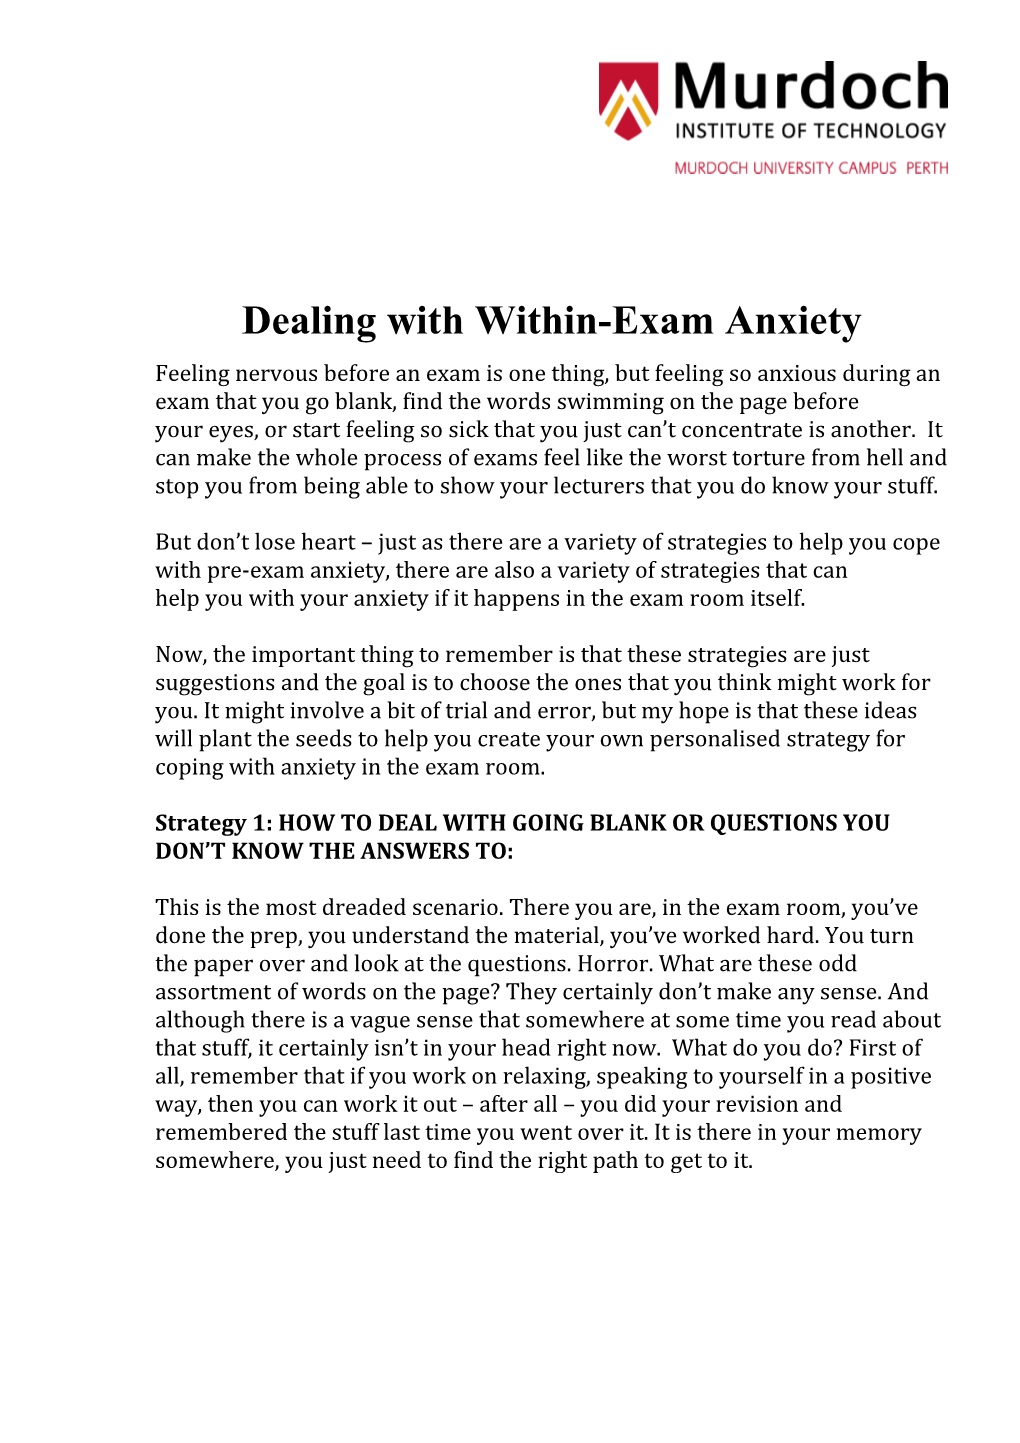 Dealing with Within-Exam Anxiety